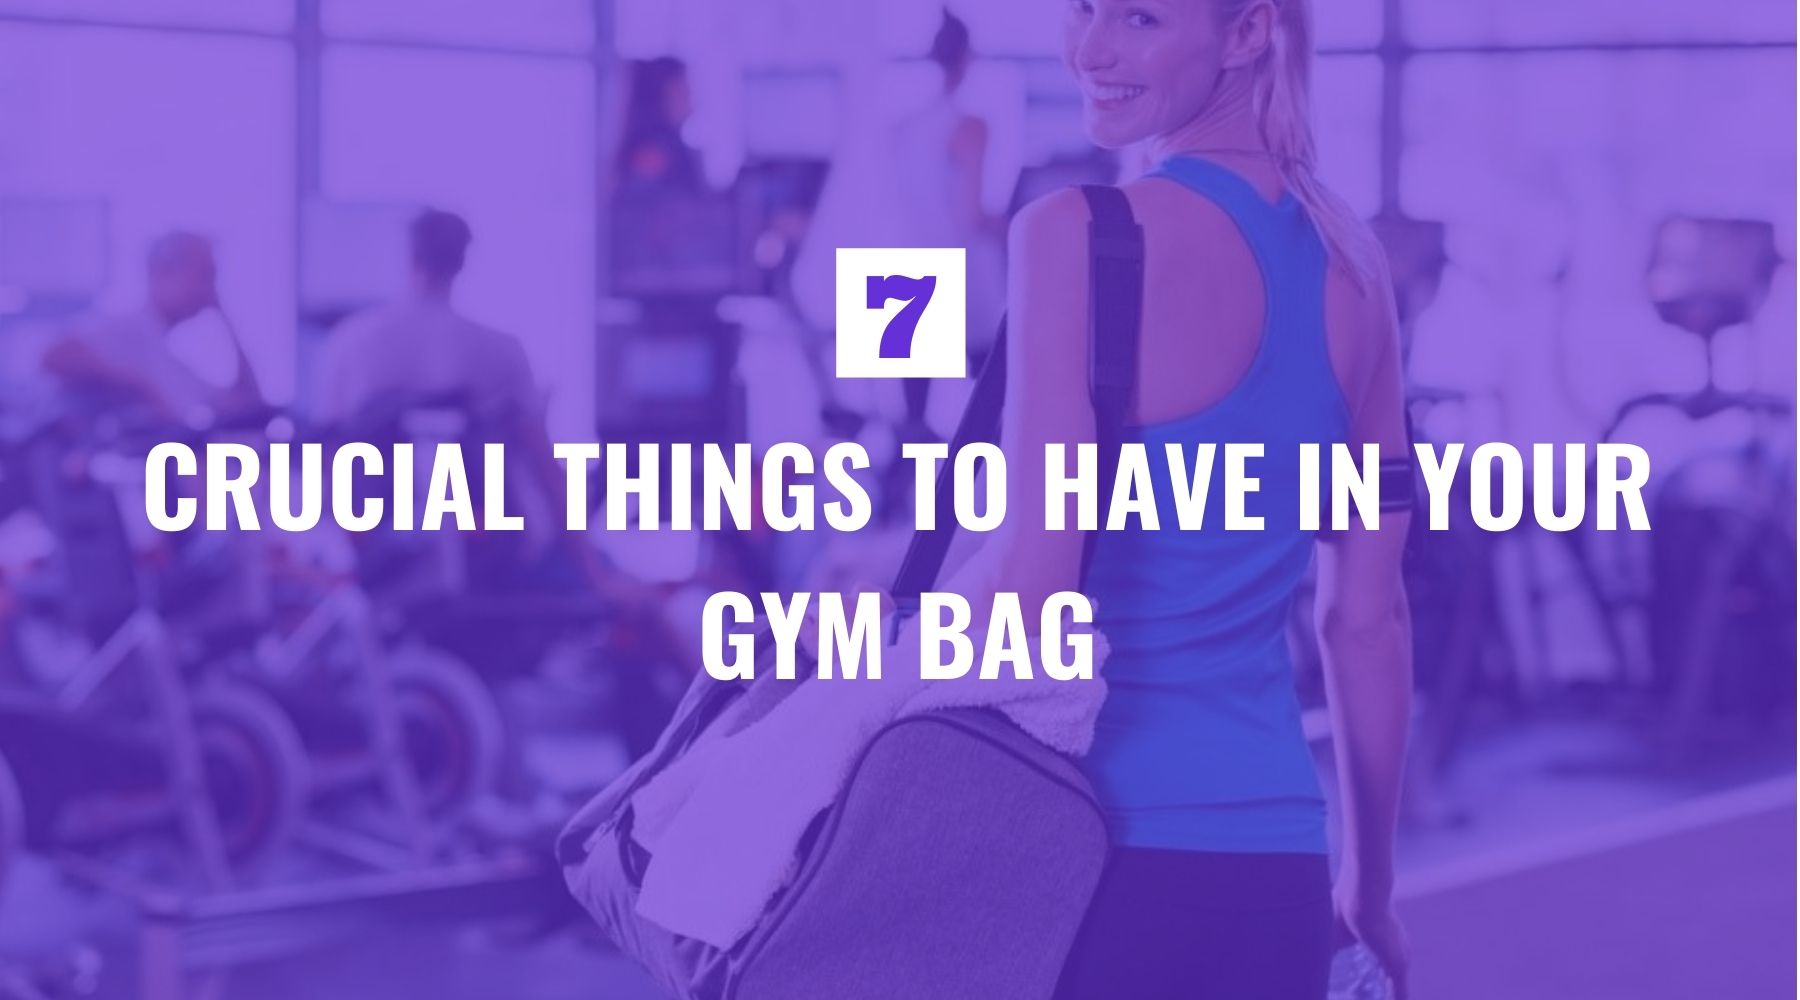 7 Crucial Things to Have in Your Gym Bag